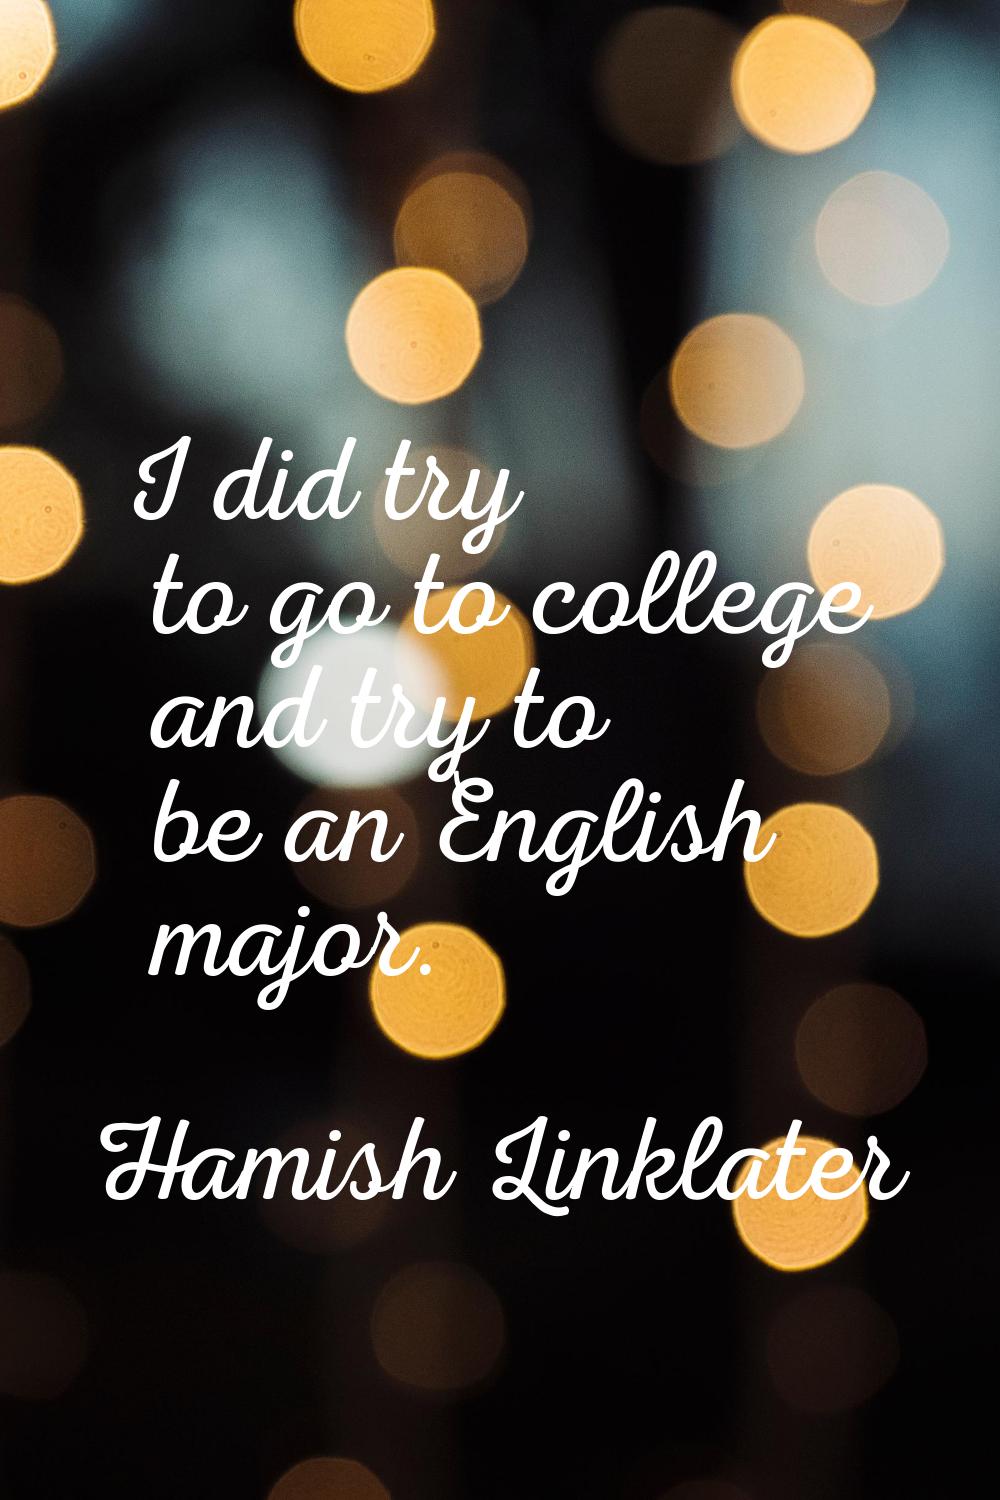 I did try to go to college and try to be an English major.